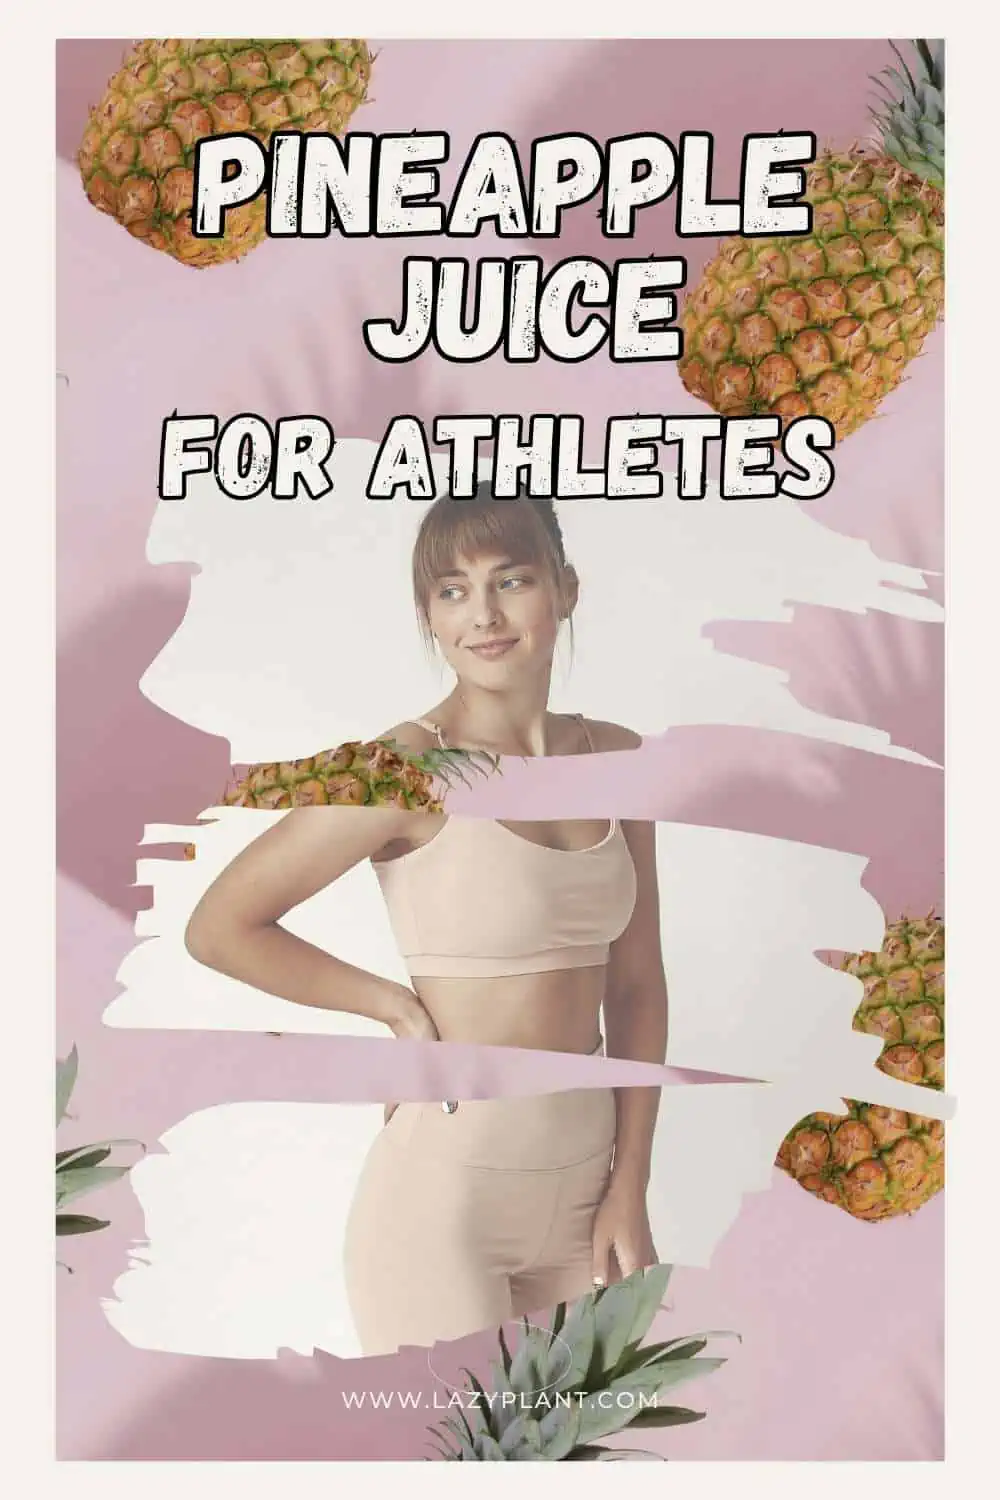 Why should athletes drink pineapple juice before or after exercise?